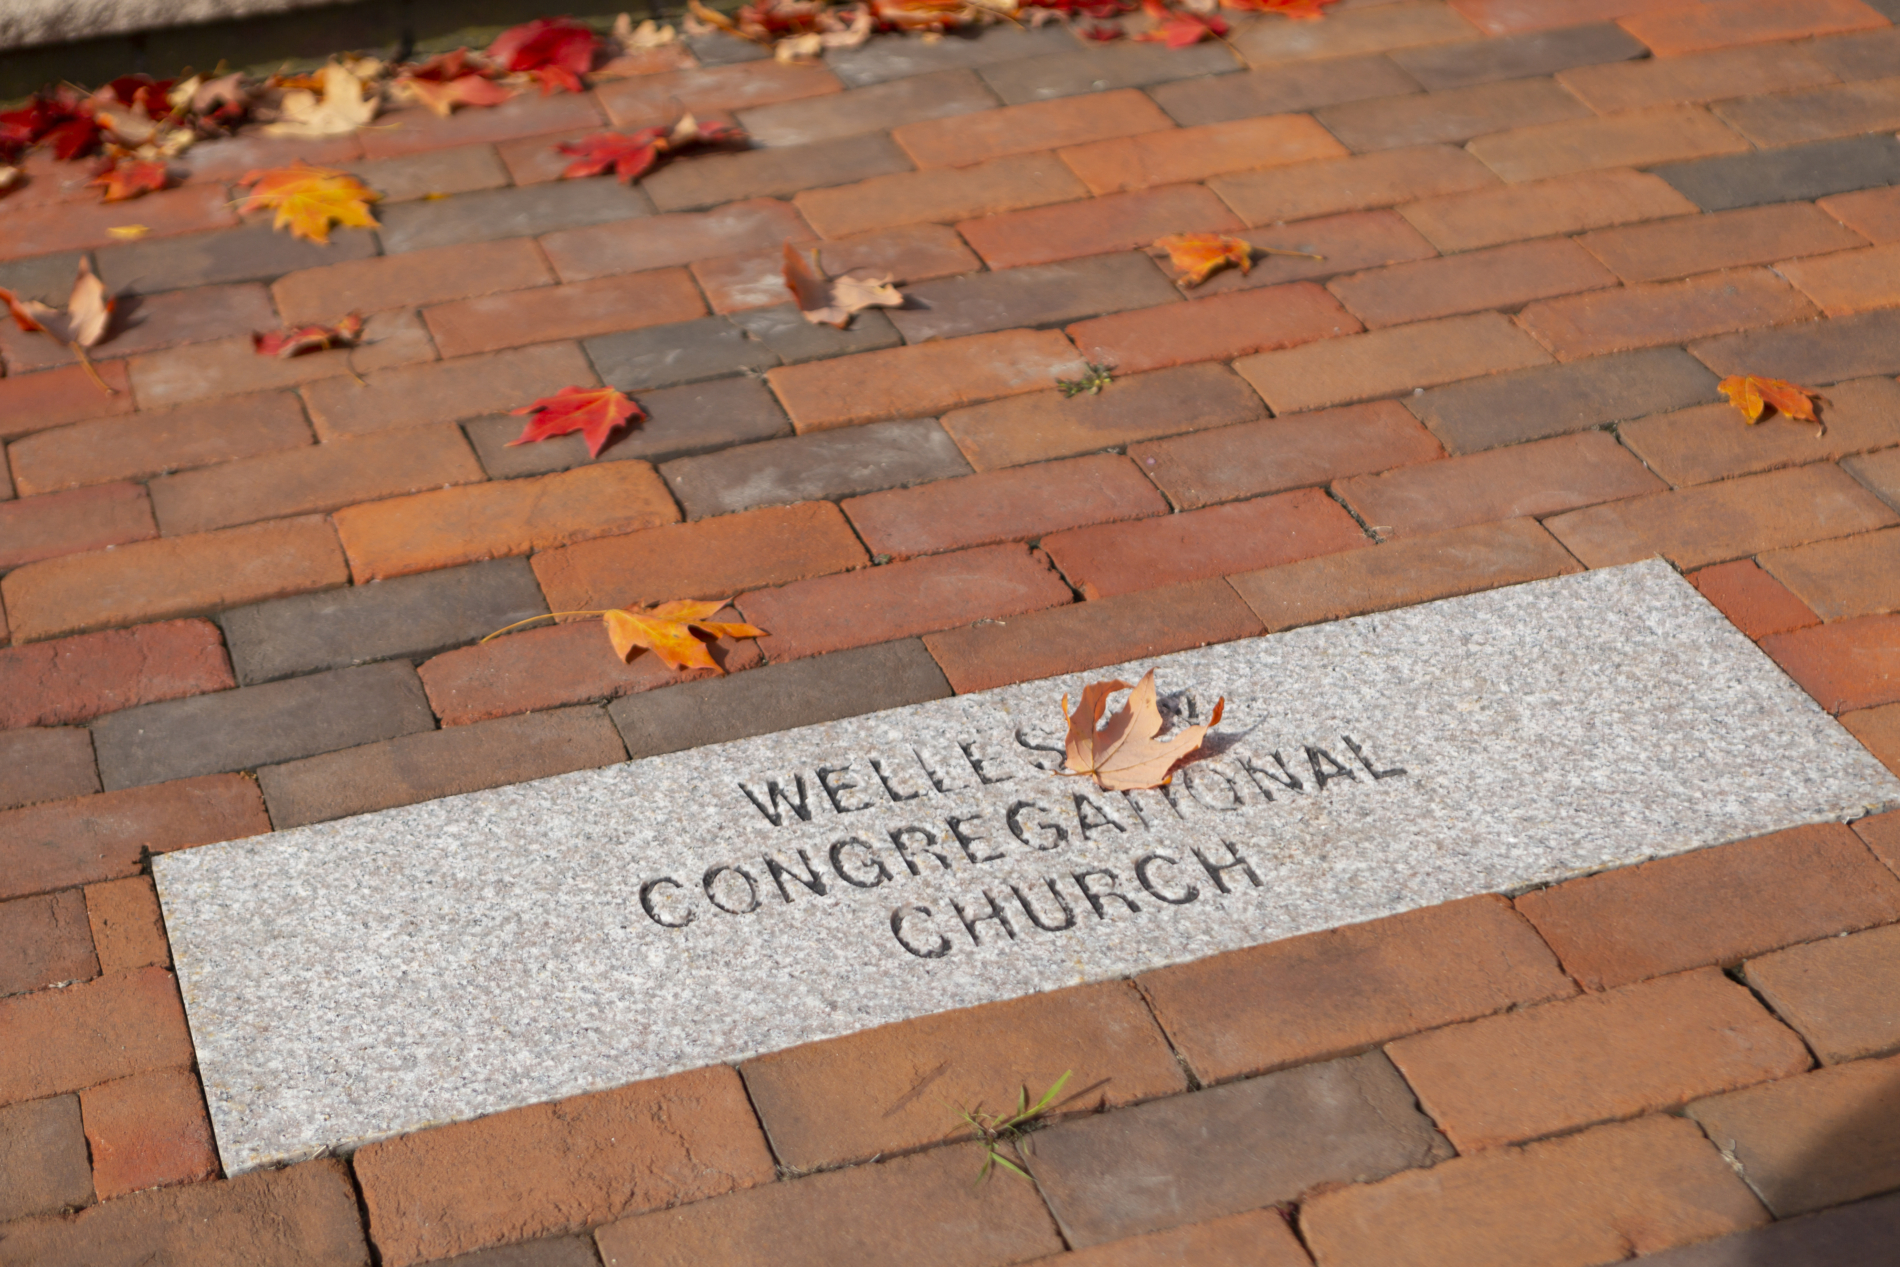 Stone paver engraved with Wellesley Village Church